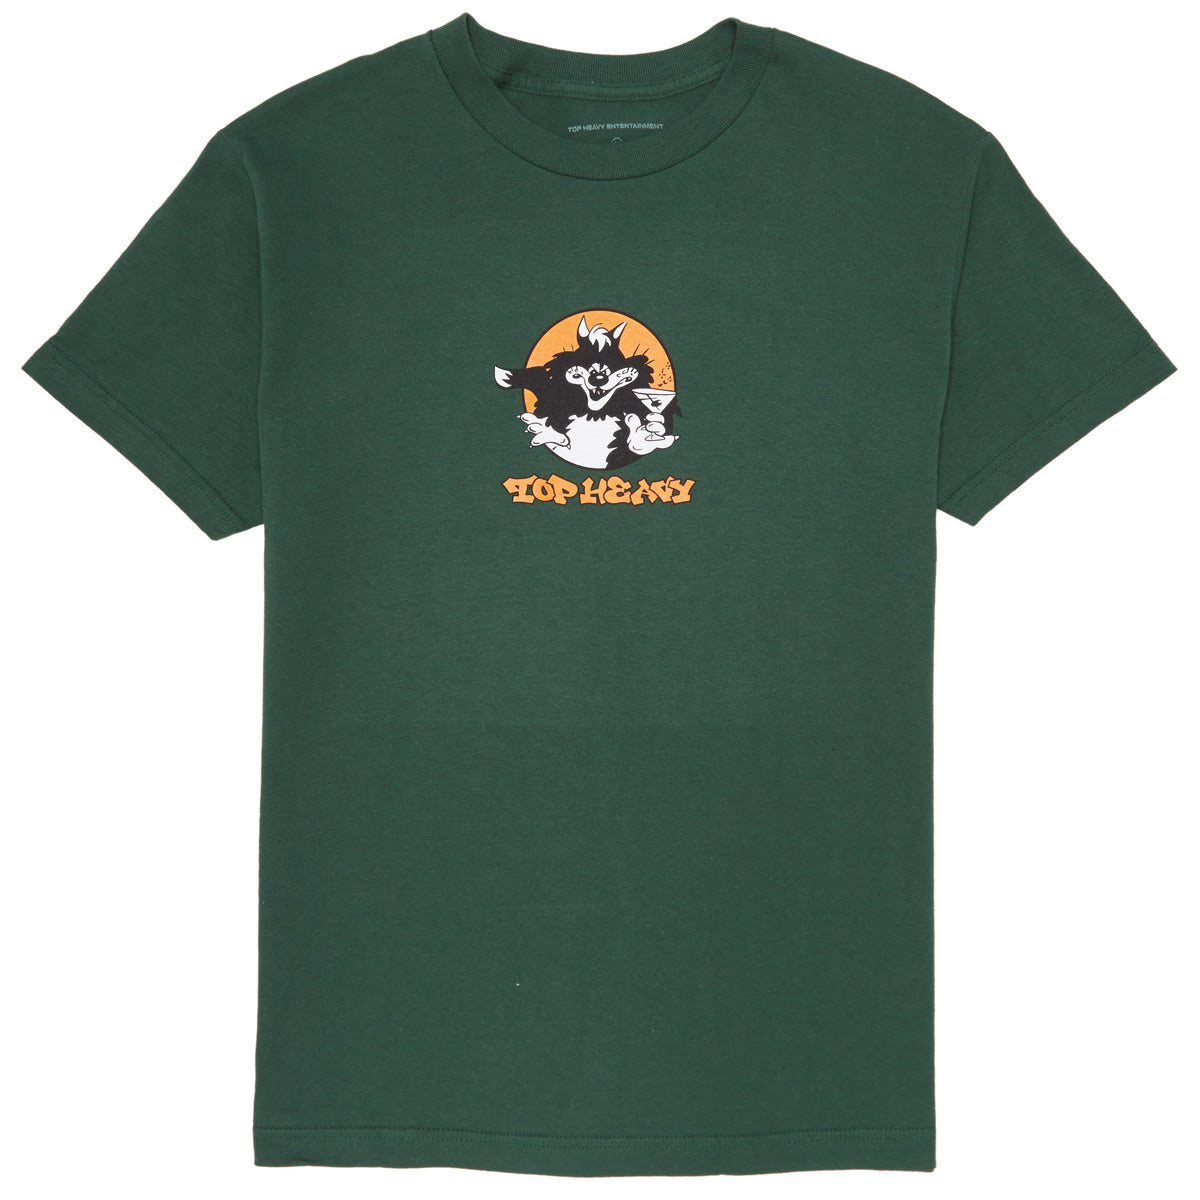 Top Heavy Martin T-Shirt - Forest image 1